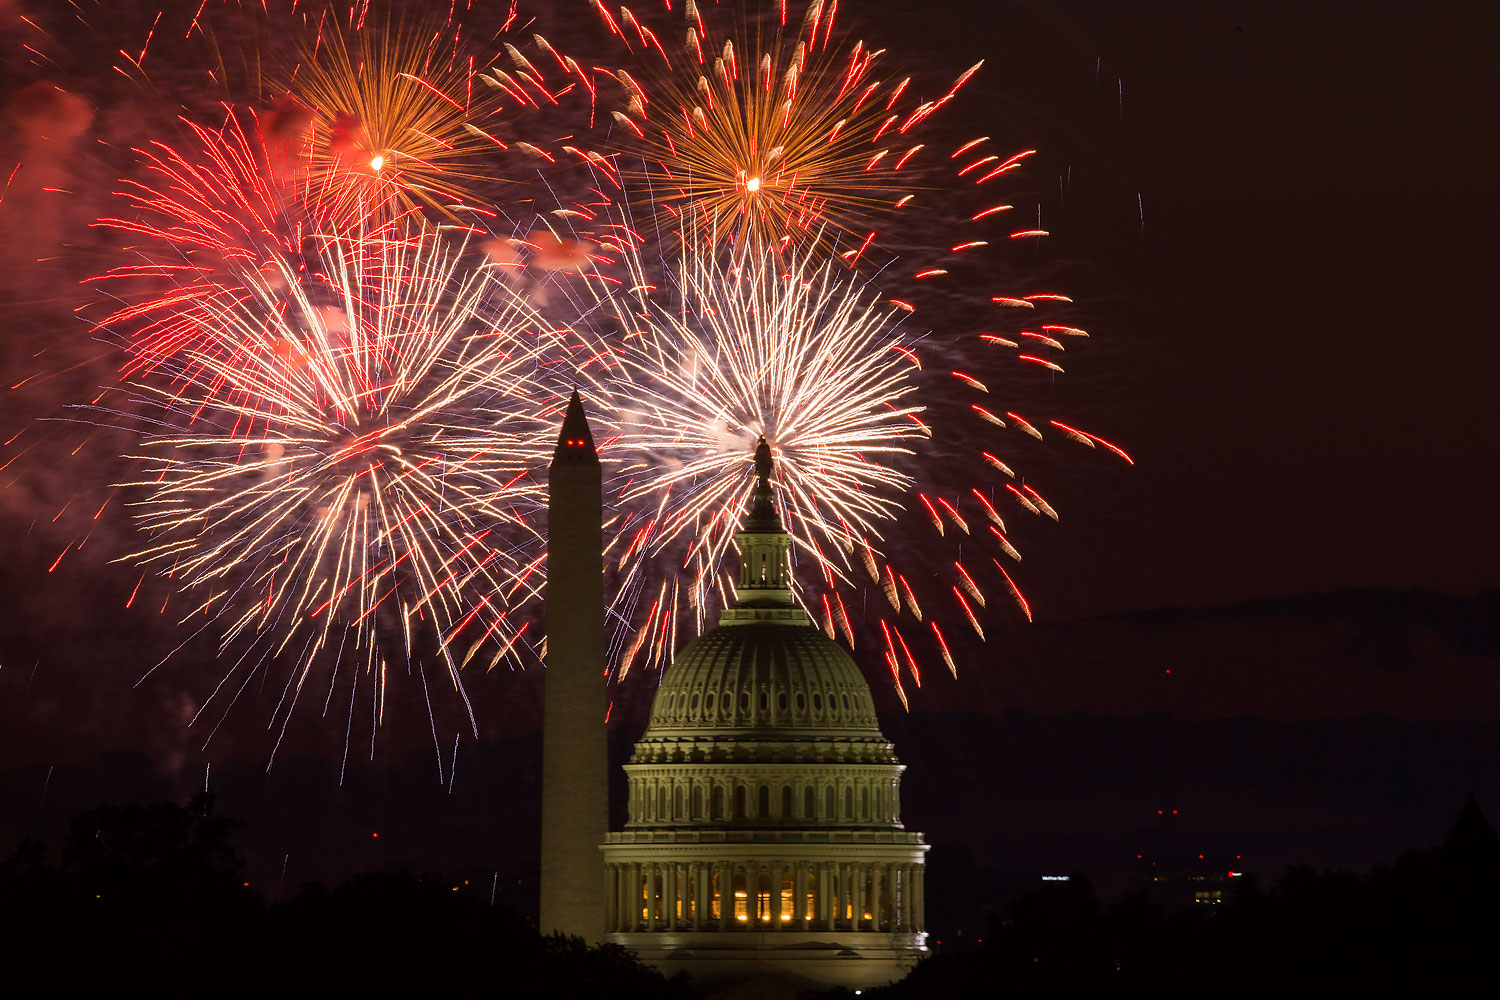 Fireworks illuminate the sky over the U.S. Capitol building and the Washington Monument during Fourth of July celebrations, on Friday, July 4, 2014, in Washington. (Evan Vucci—AP)